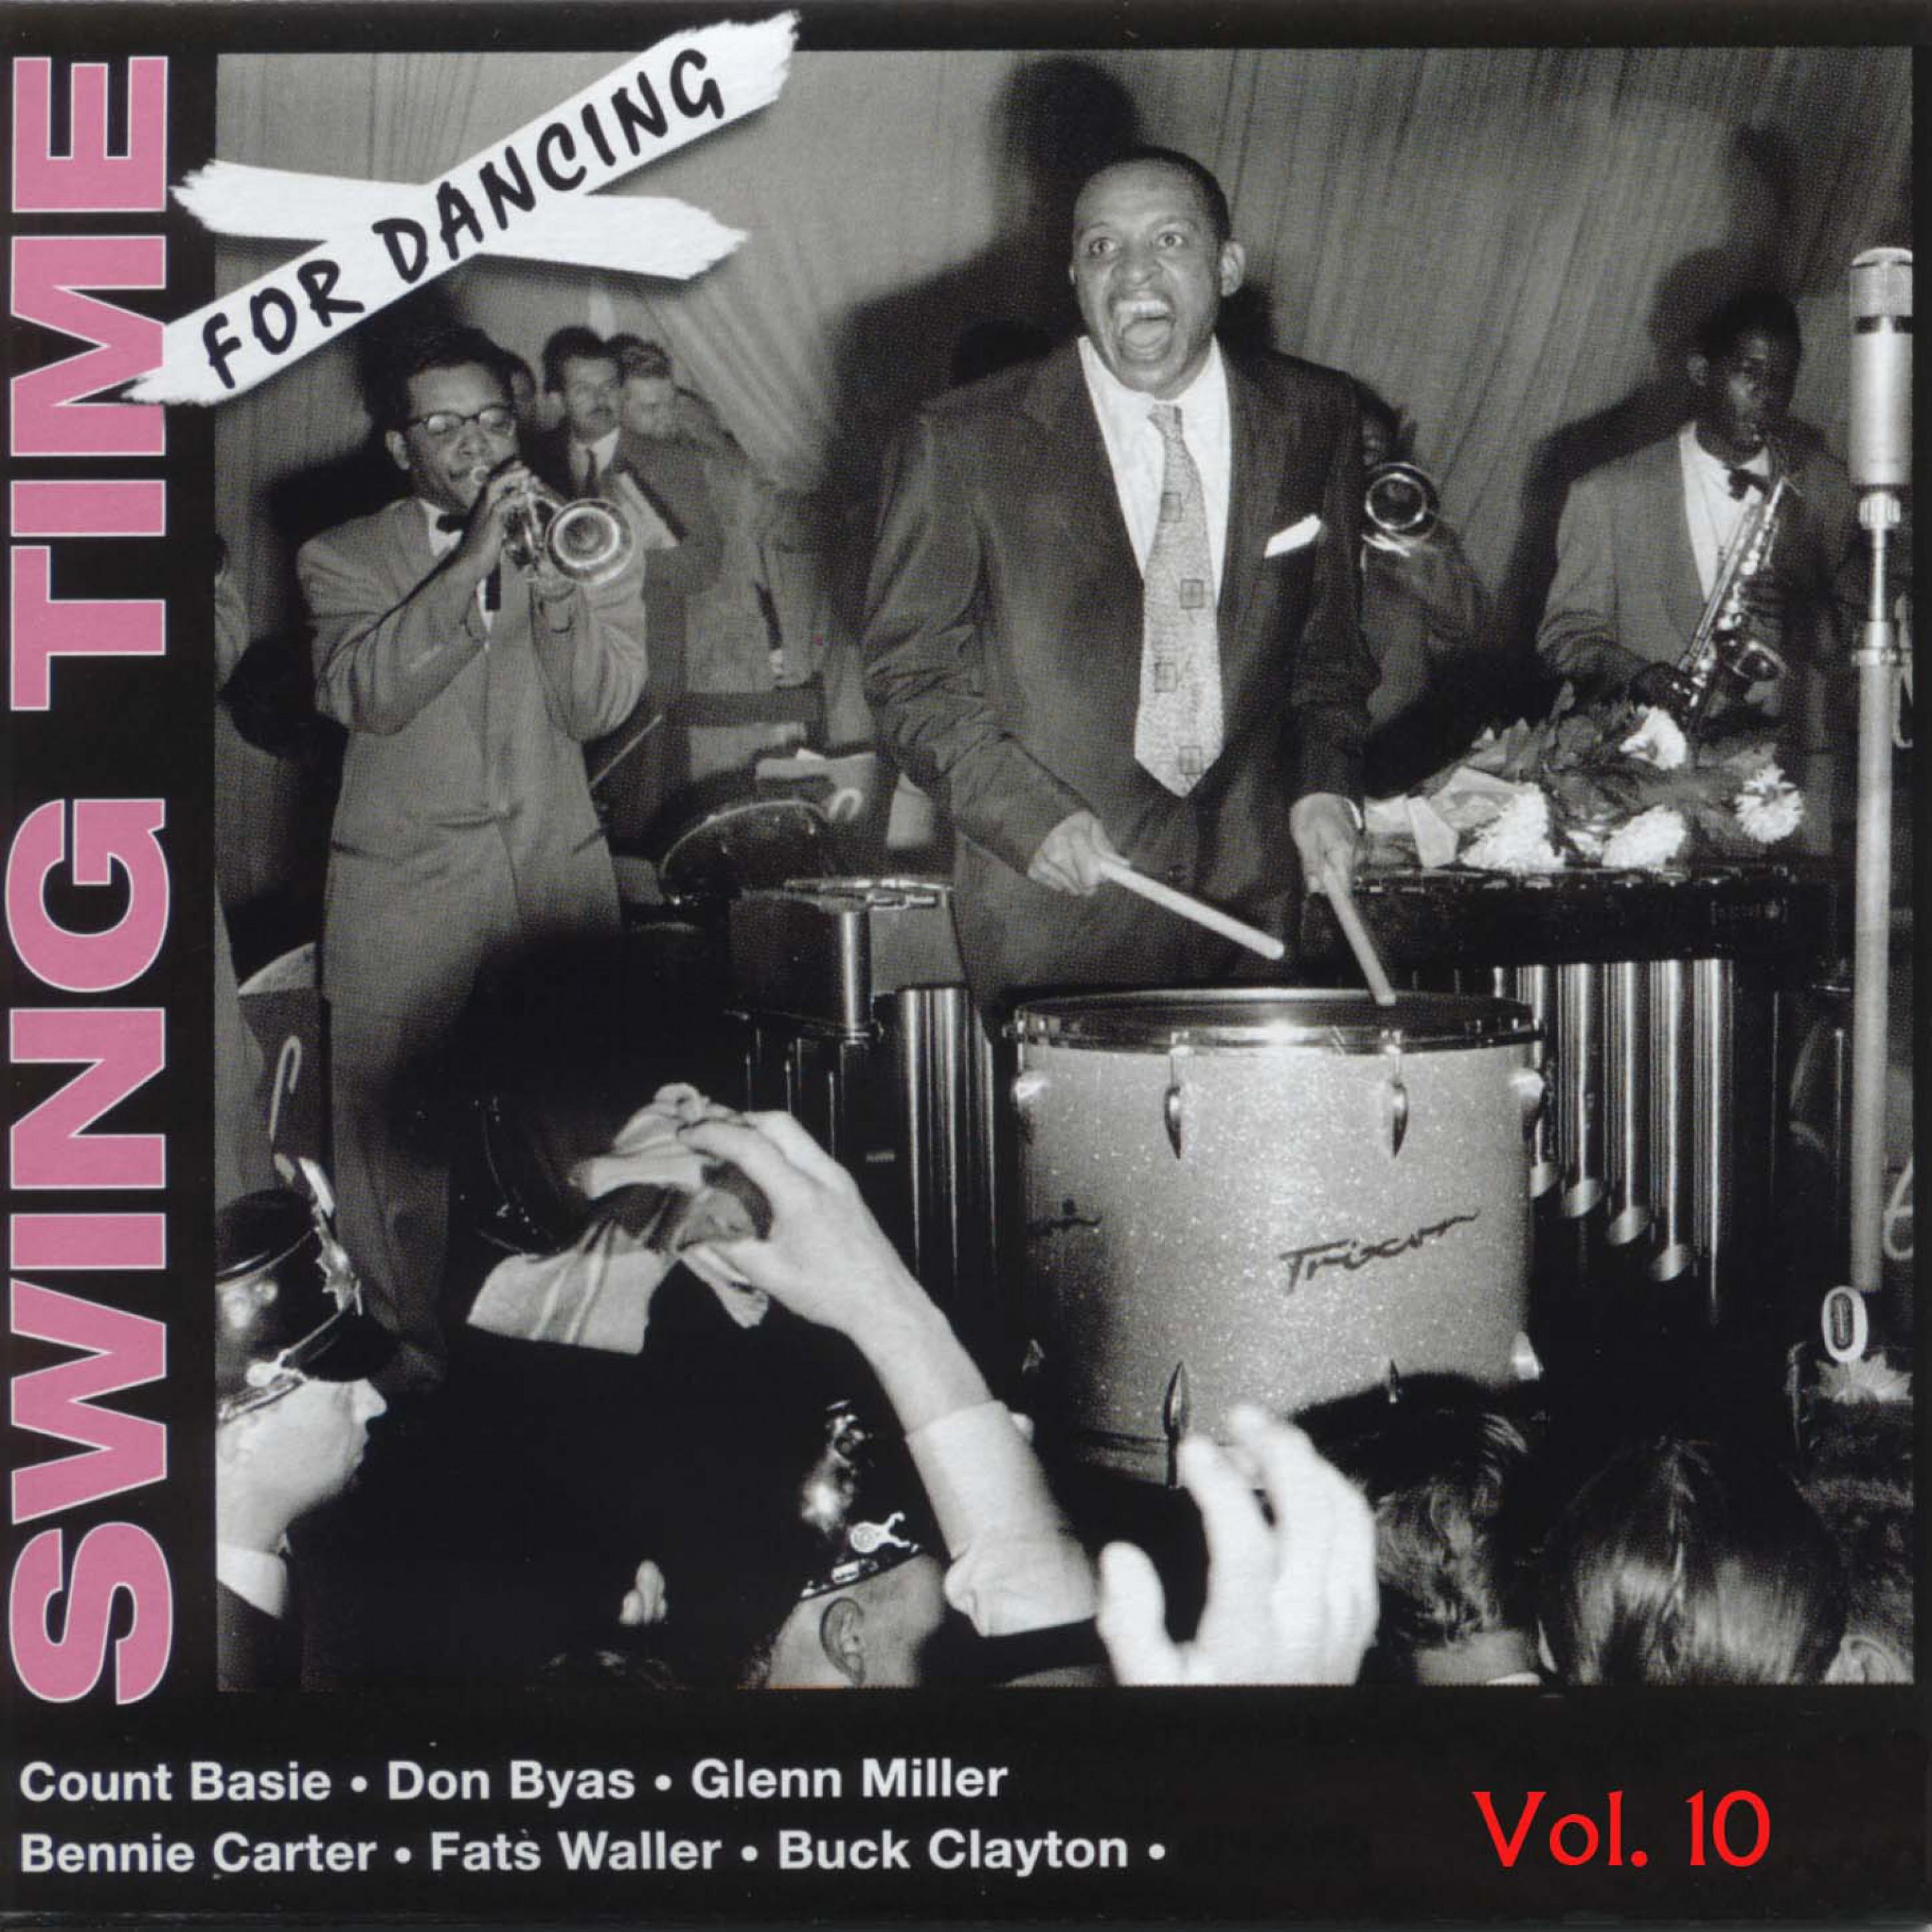 Swing Time for Dancing Vol. 10